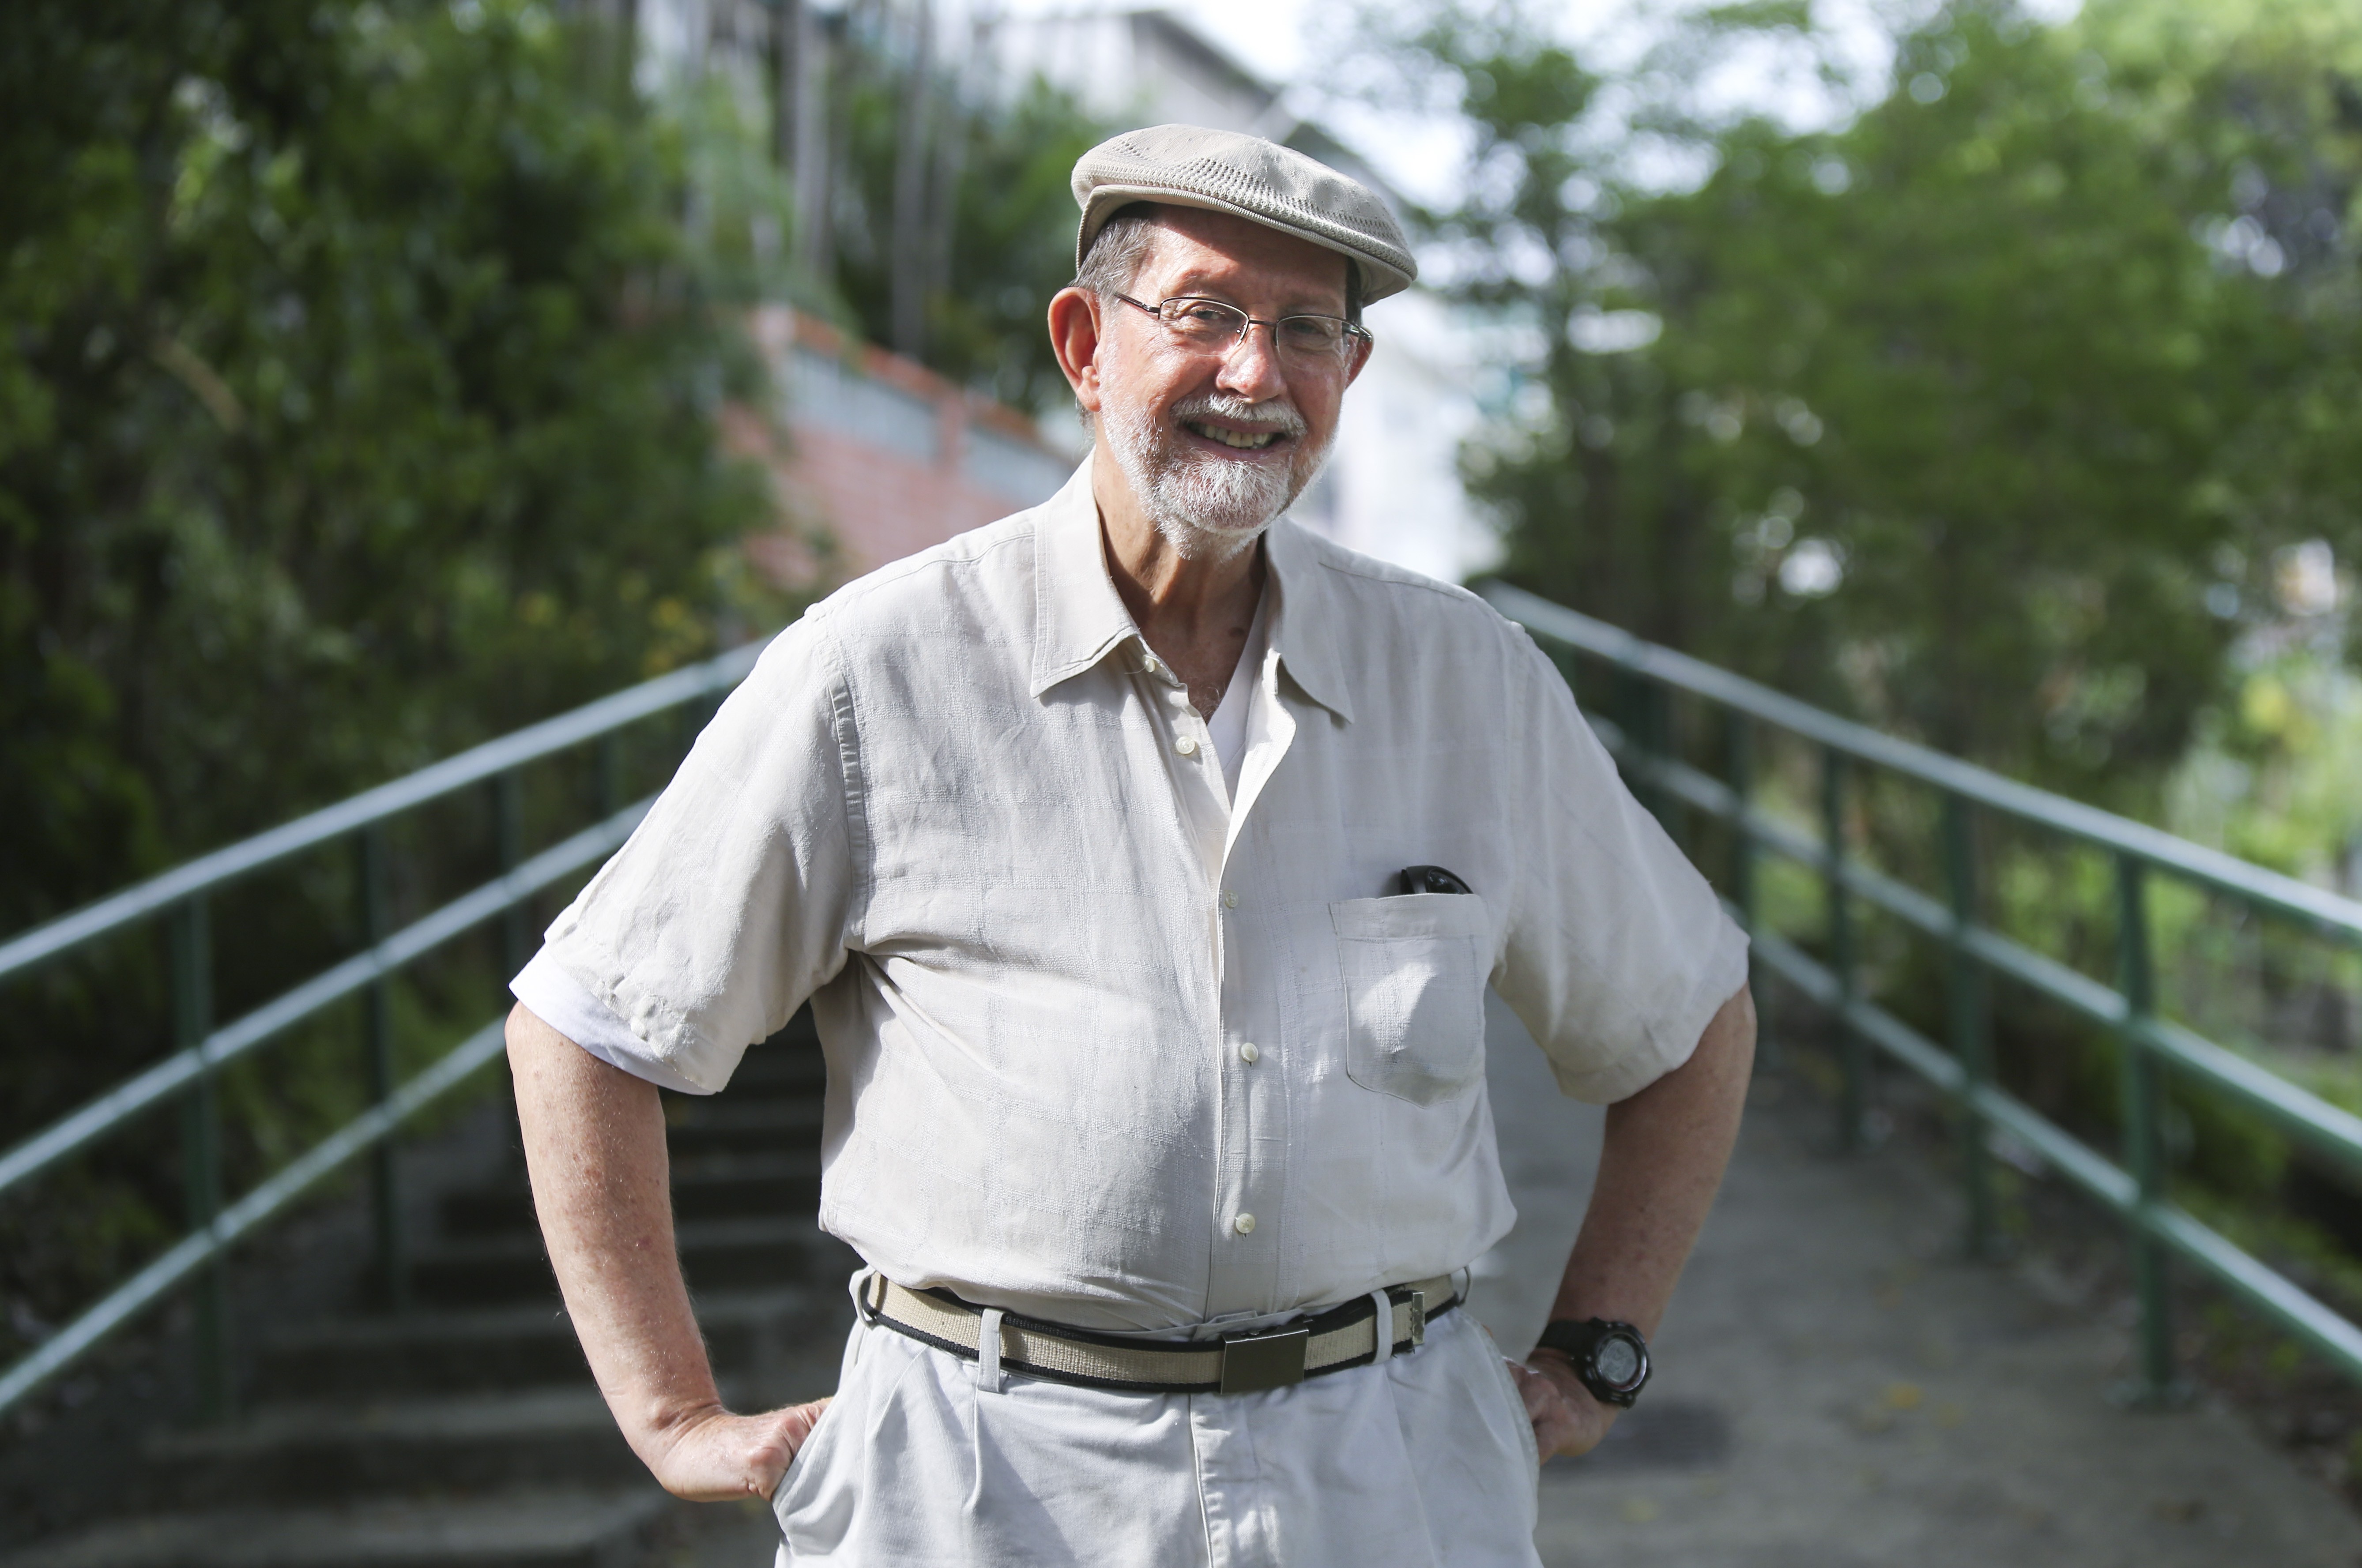 Robert Bauer came to Hong Kong in 1997 to dedicate himself to the study of Cantonese. Photo: Xiaomei Chen